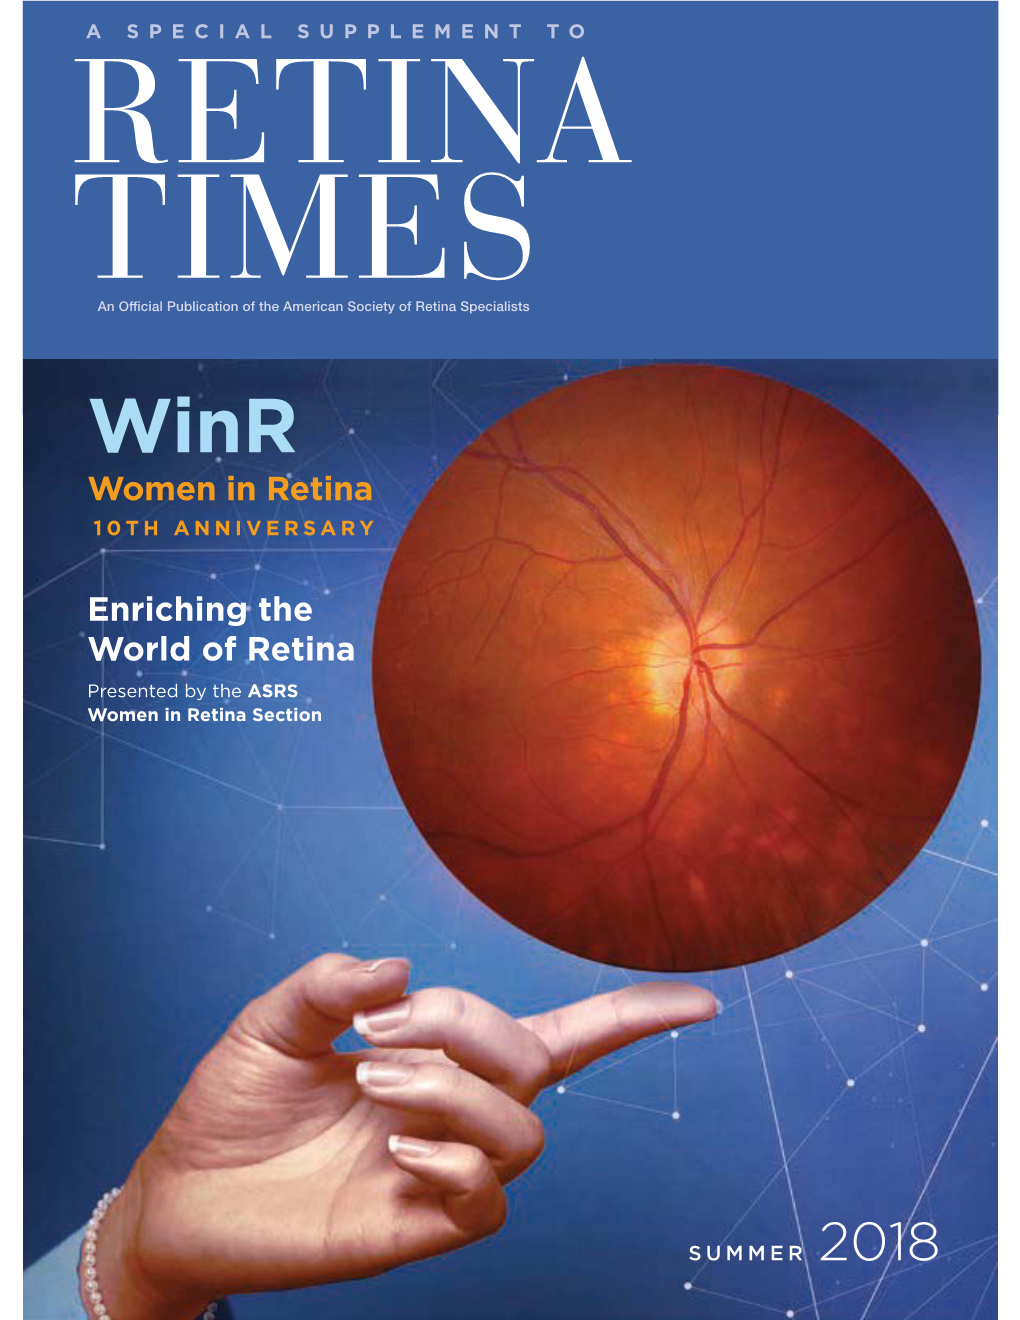 Retina Times Supplement Celebrates the 10Th Anniversary of Women In